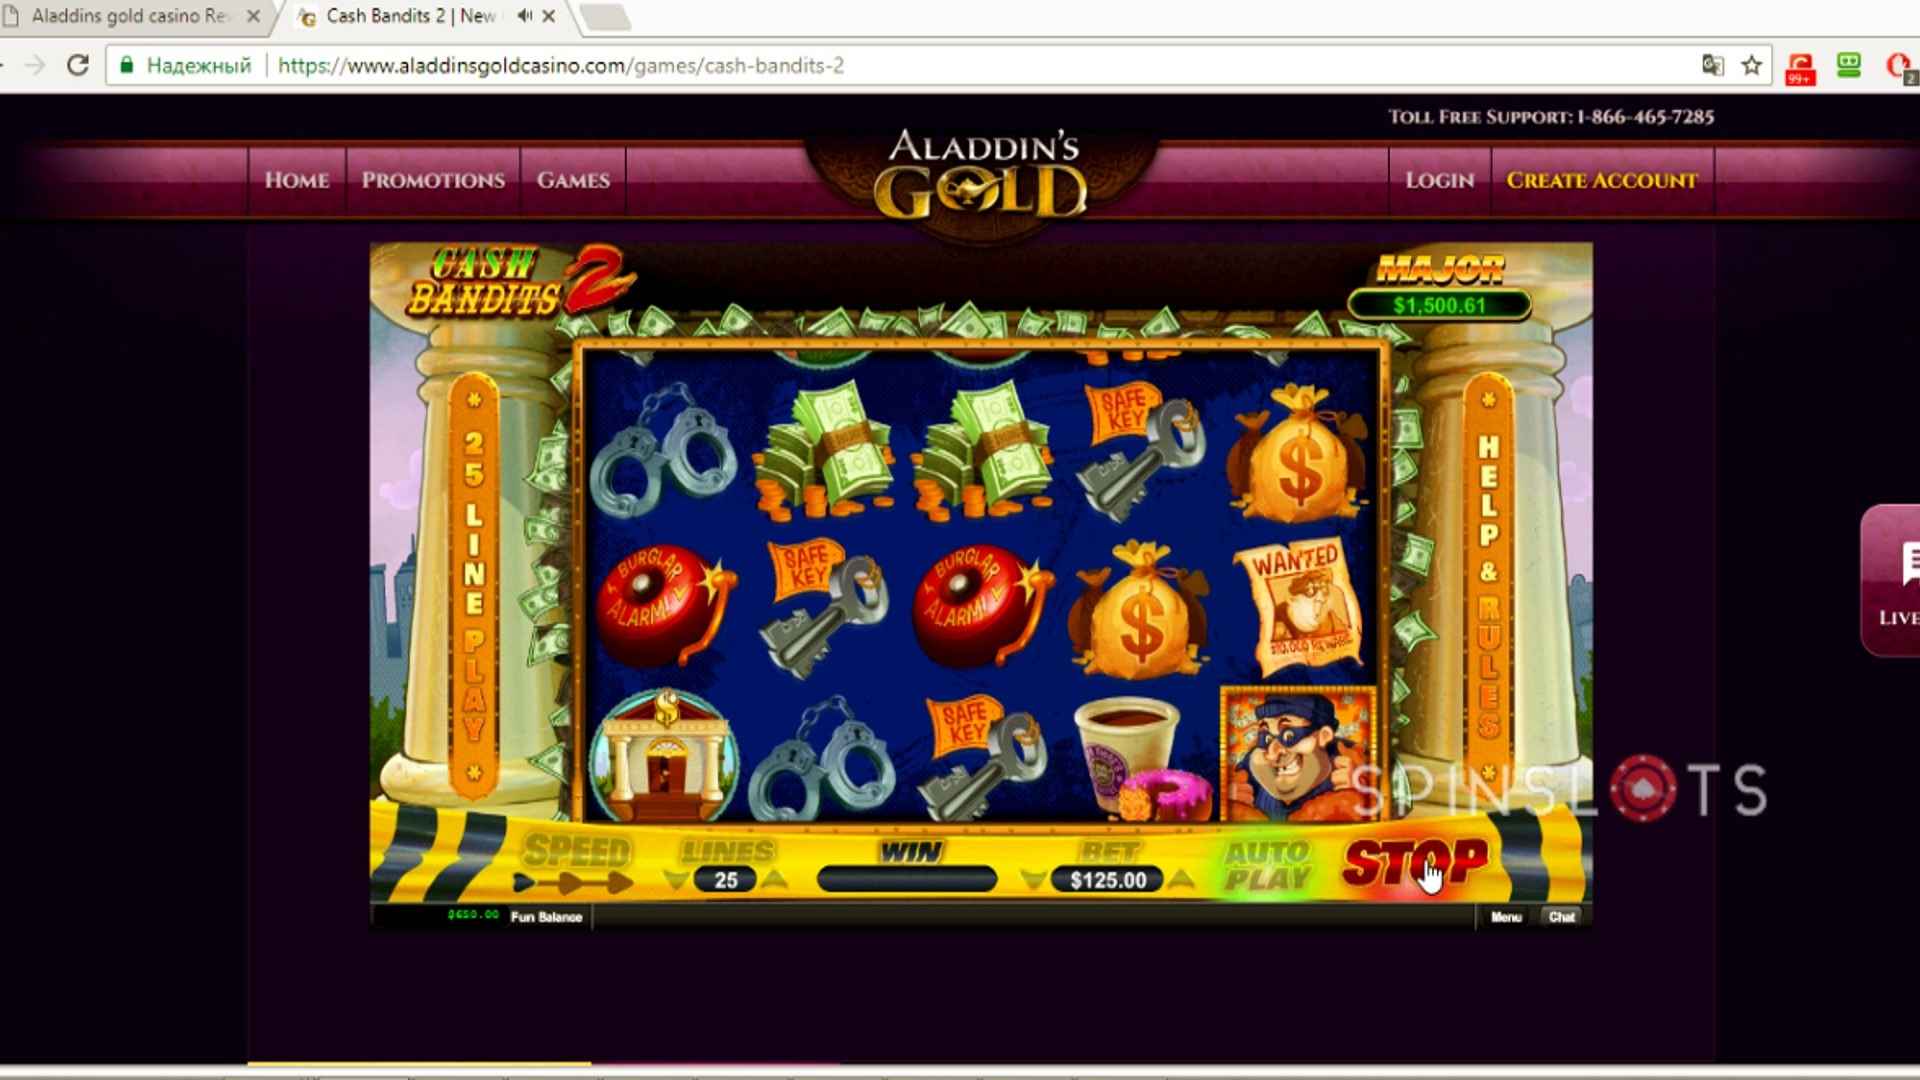 Aladdins Gold Casino Offers New Players Unlimited Bonuses